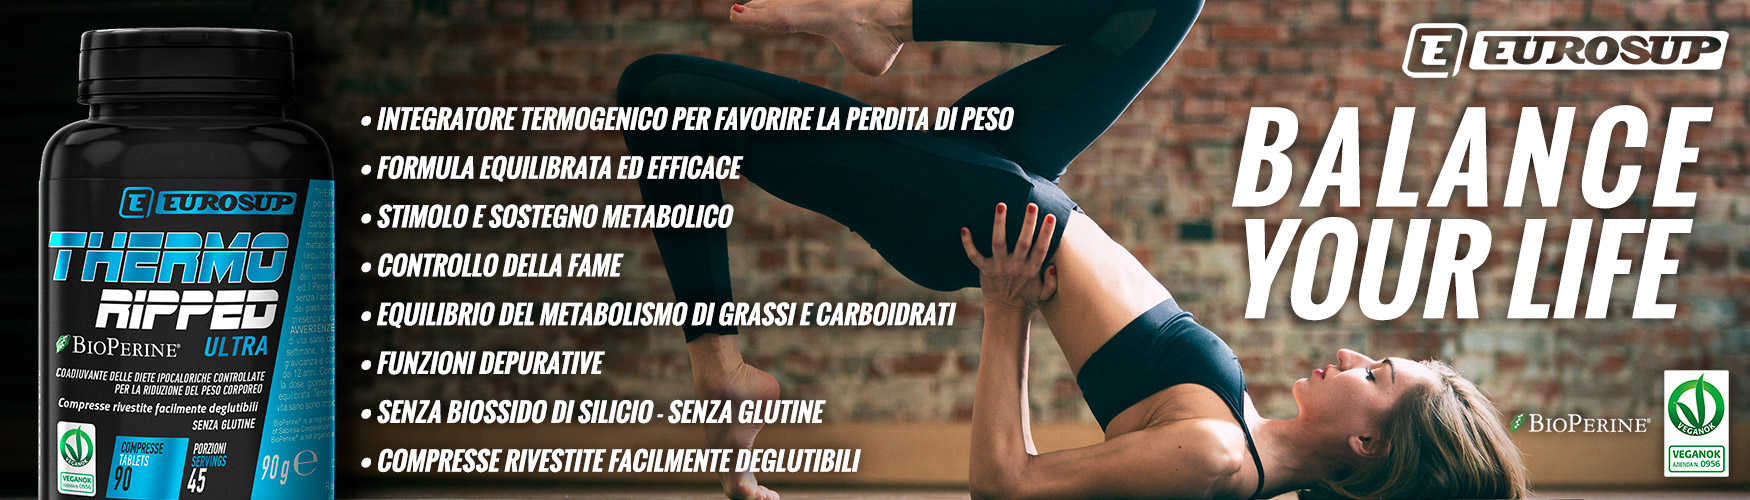 Eurosup---WEB---THERMO-RIPPED-ULTRA---BANNER-ITA